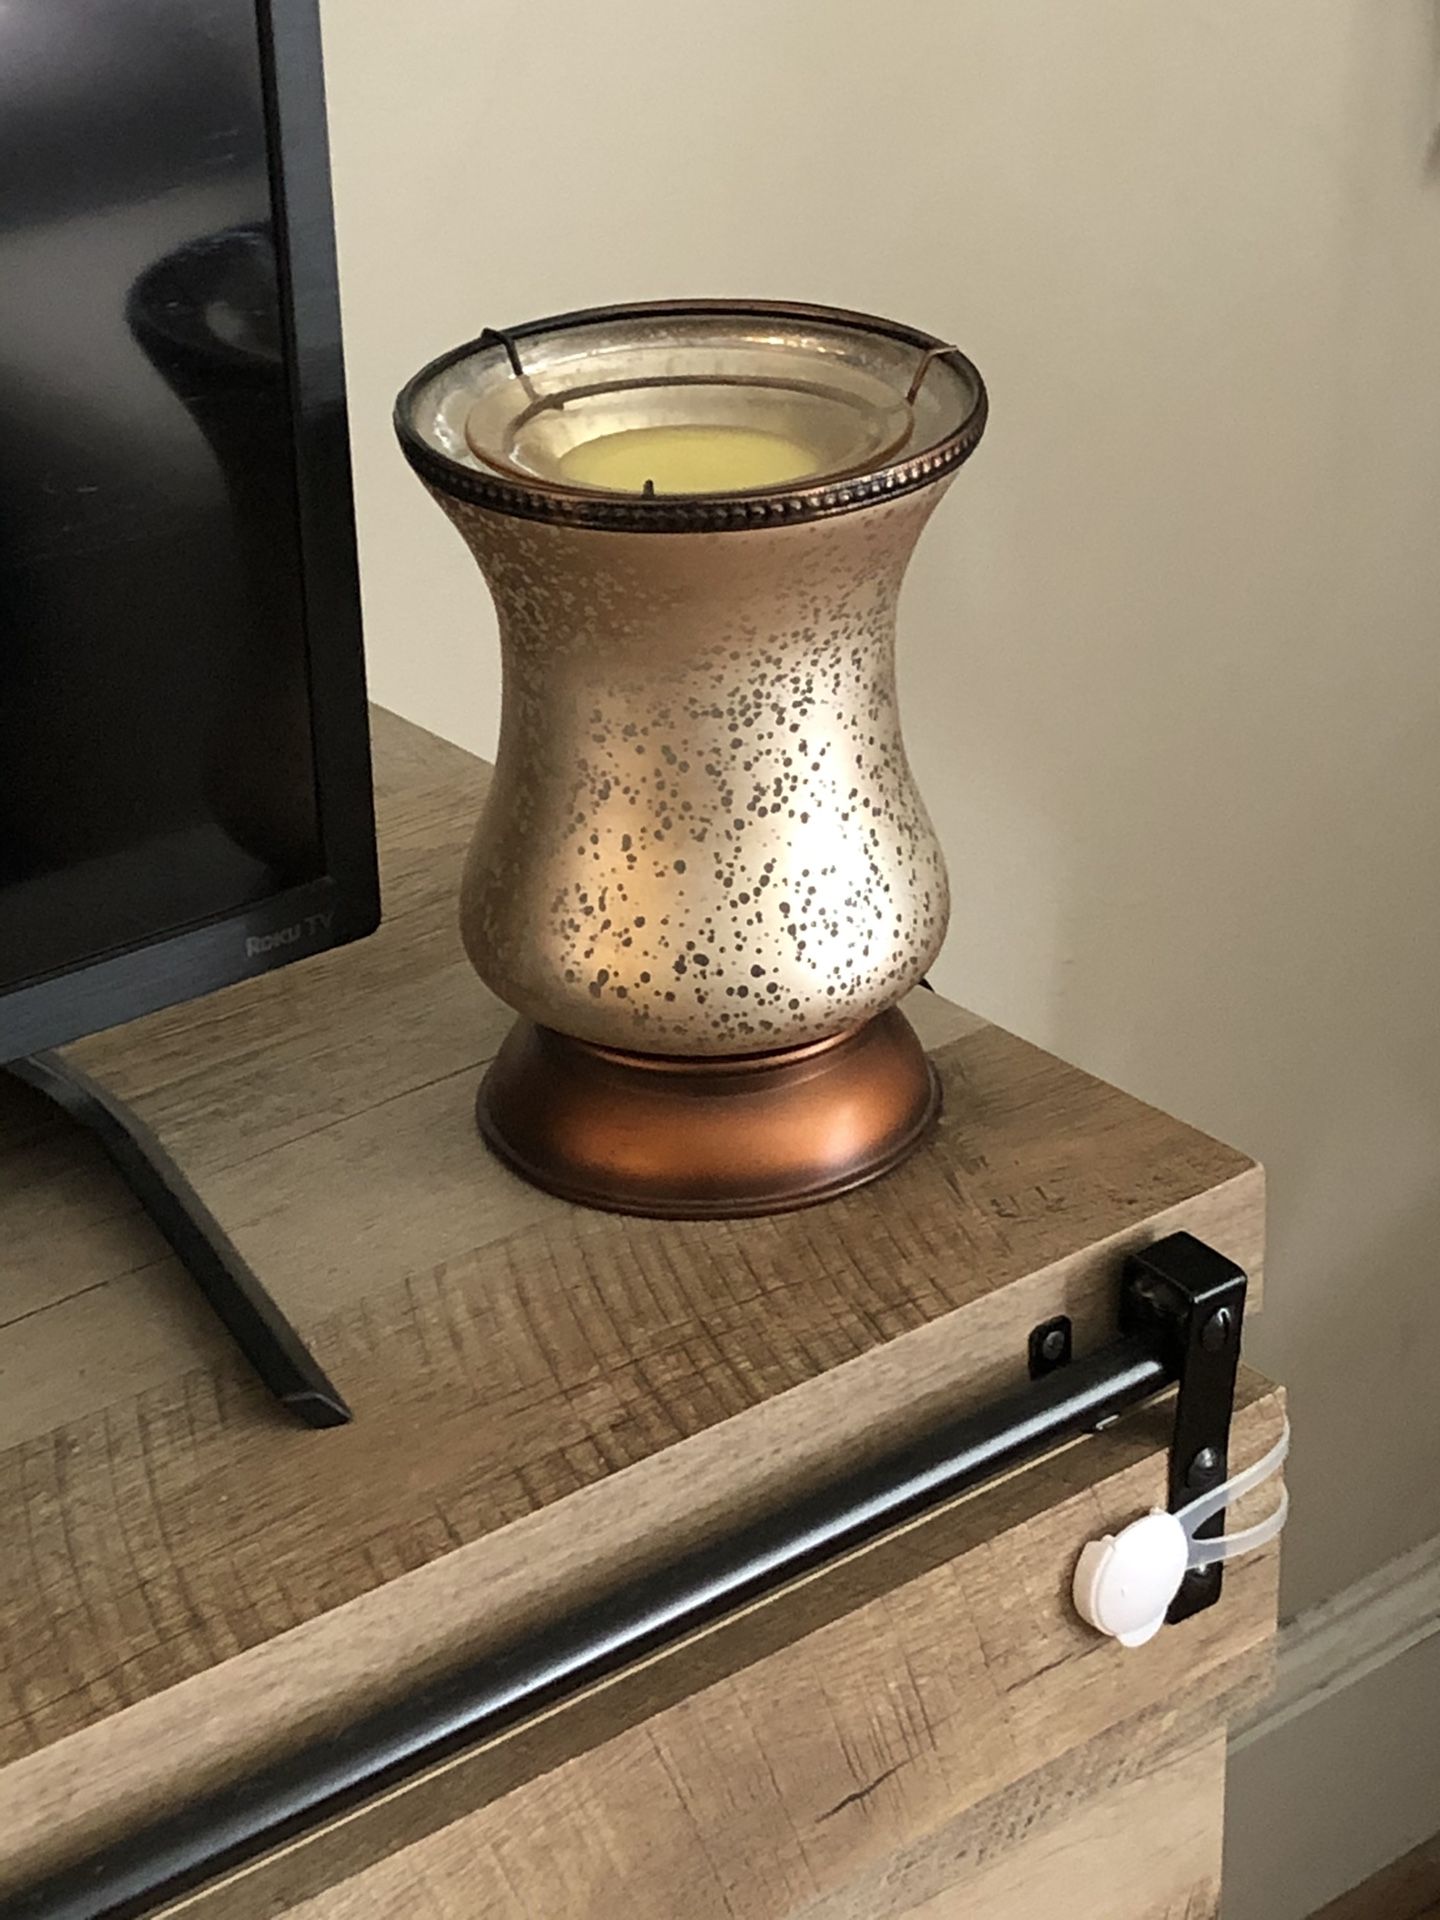 Scentsy light and warmer